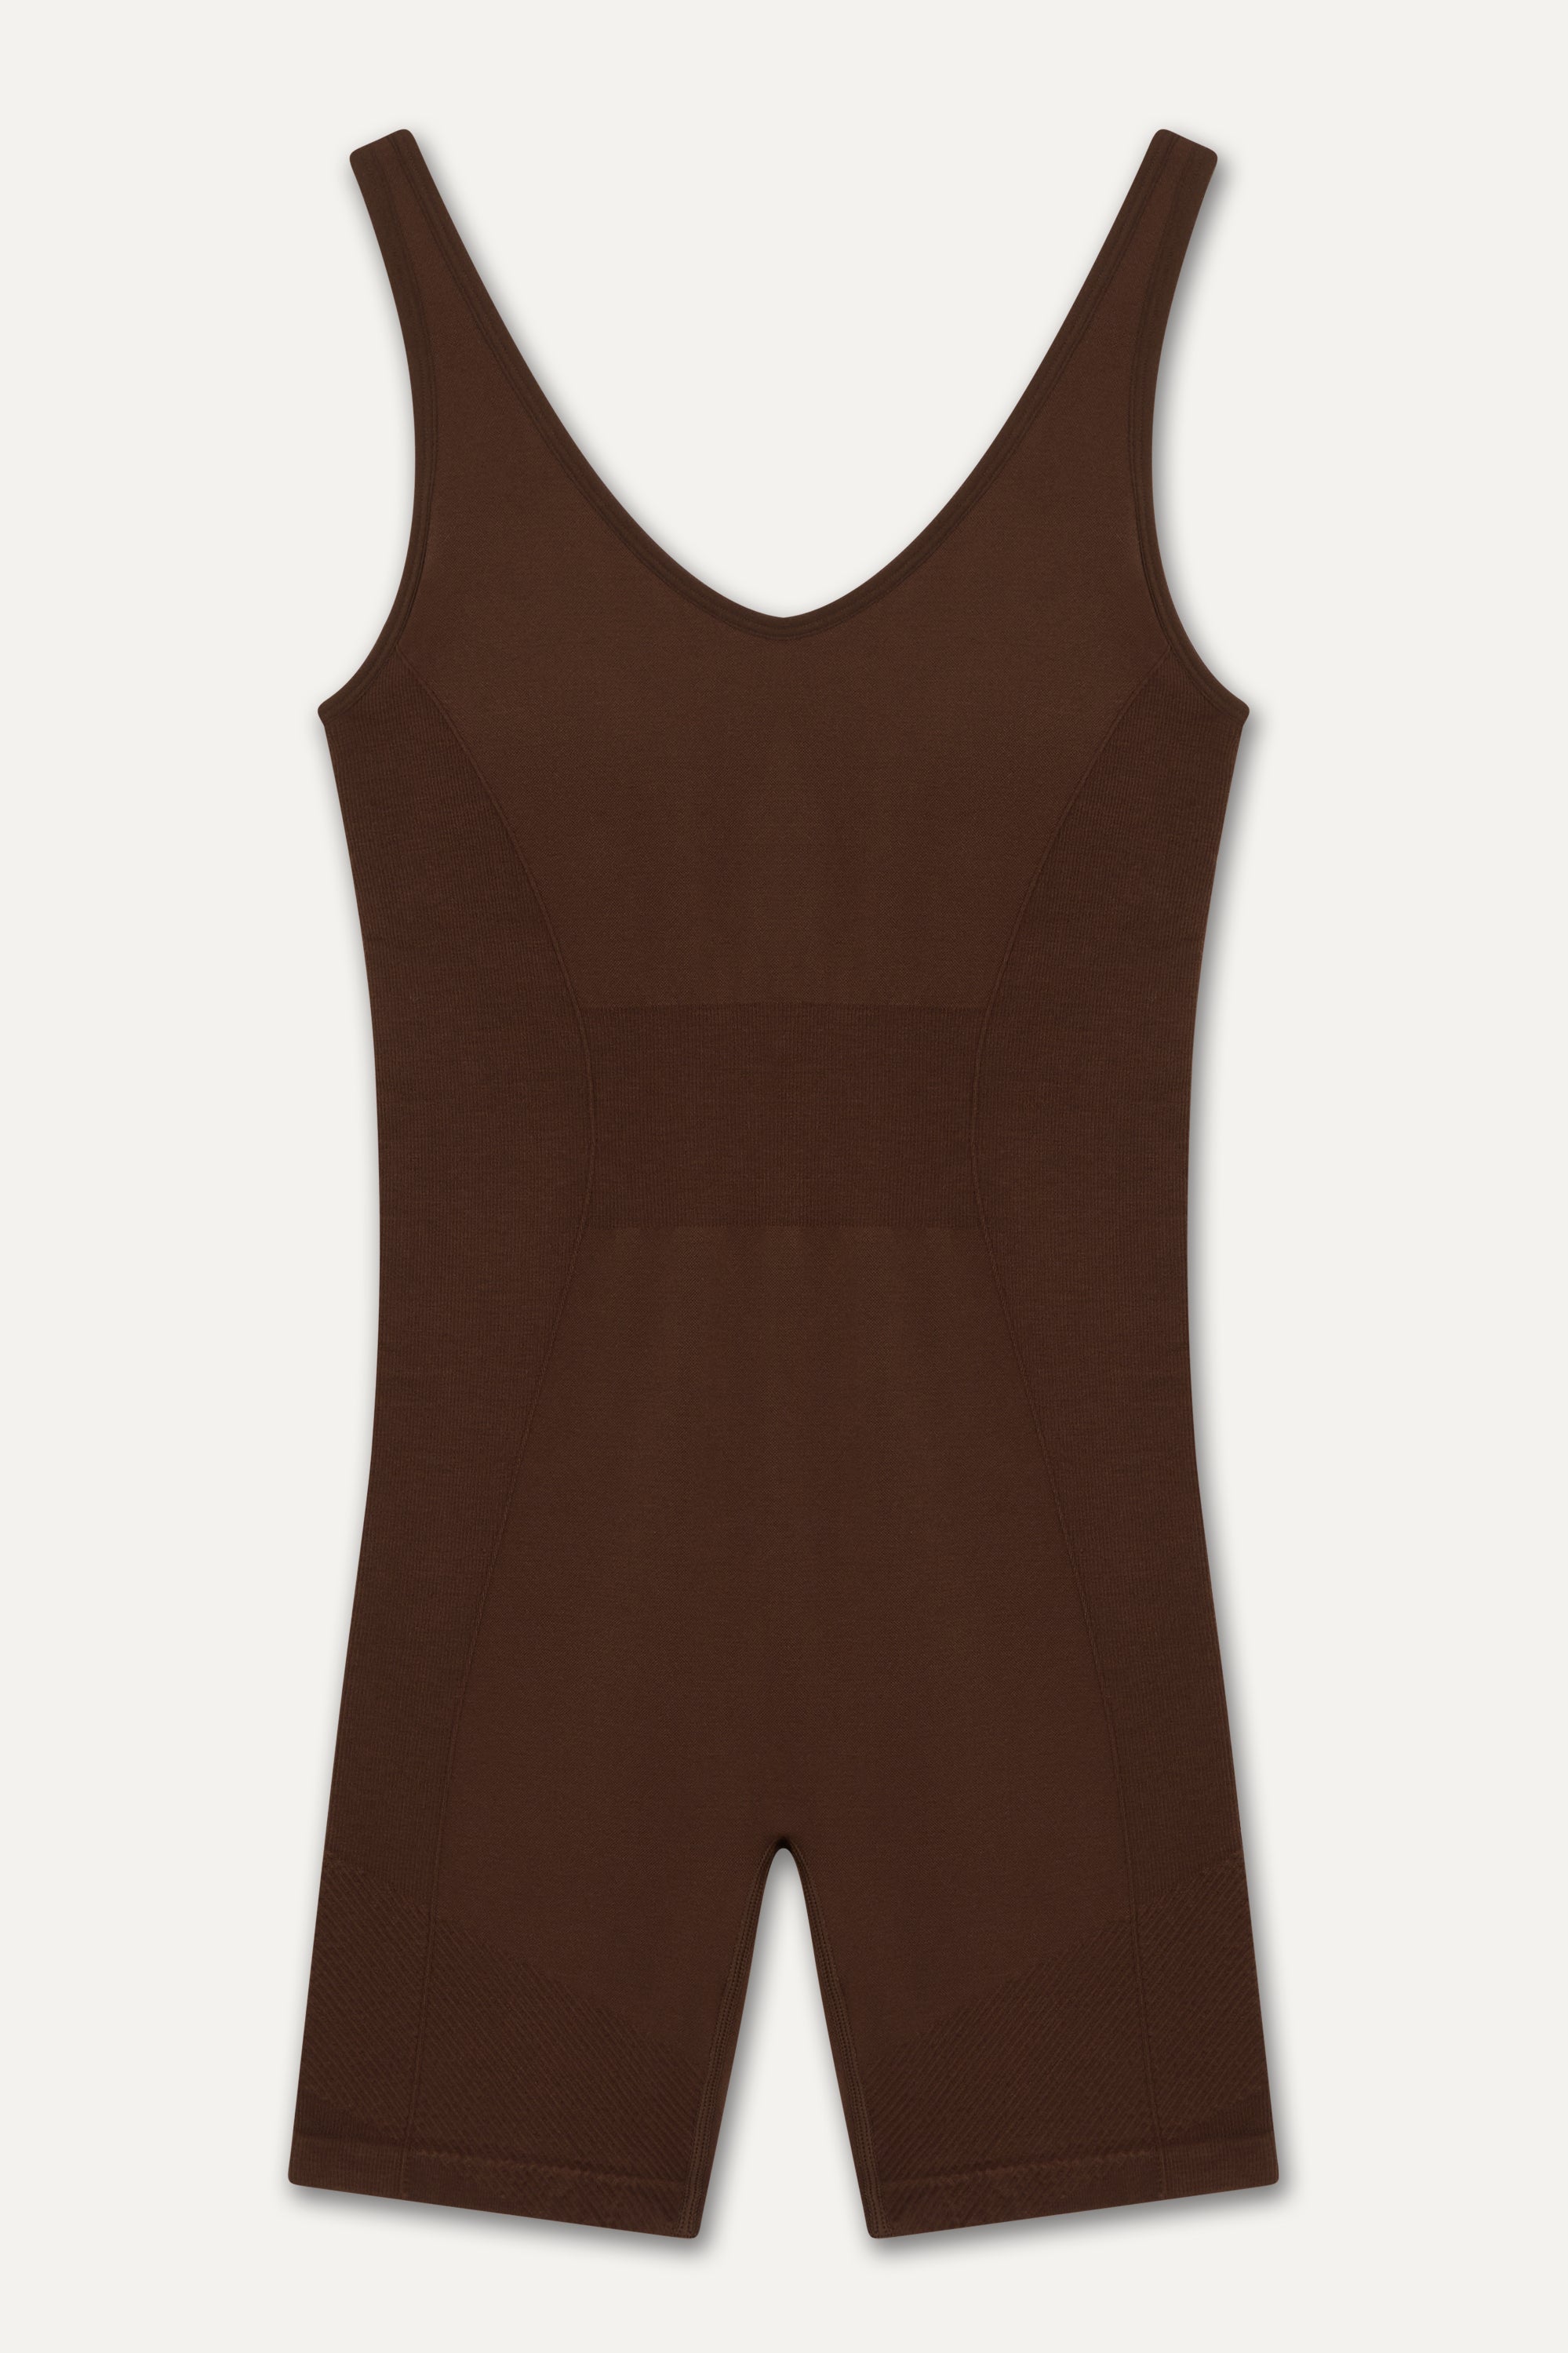 Chocolate brown modal sculpting recycled one piece, onesie, all in one overall for gym pilates, yoga and running from sustainable activewear brand Jilla Active